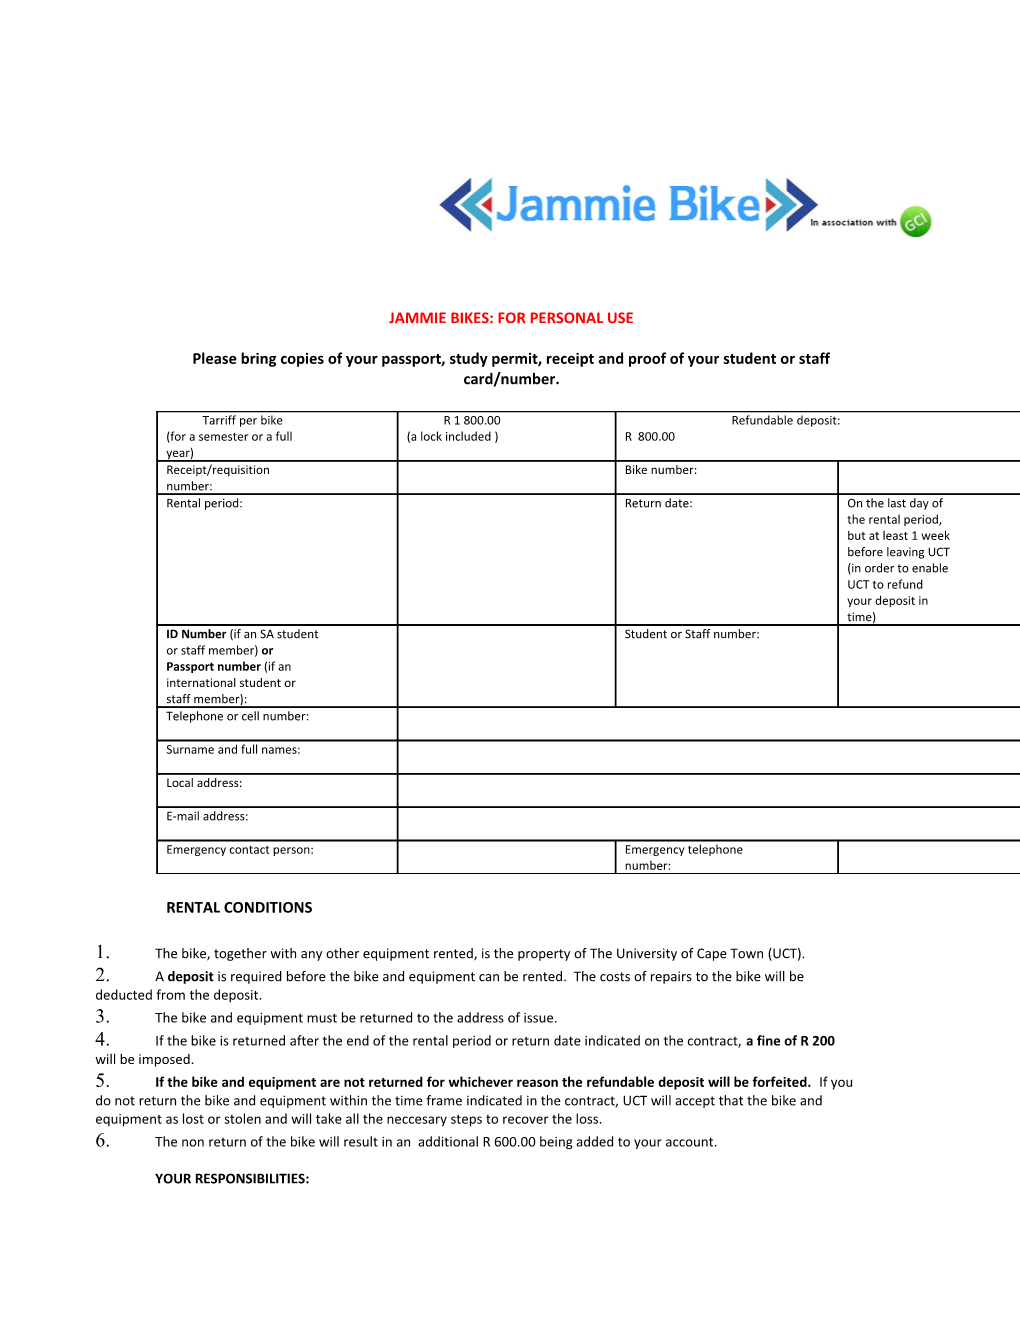 Jammie Bikes: for Personal Use